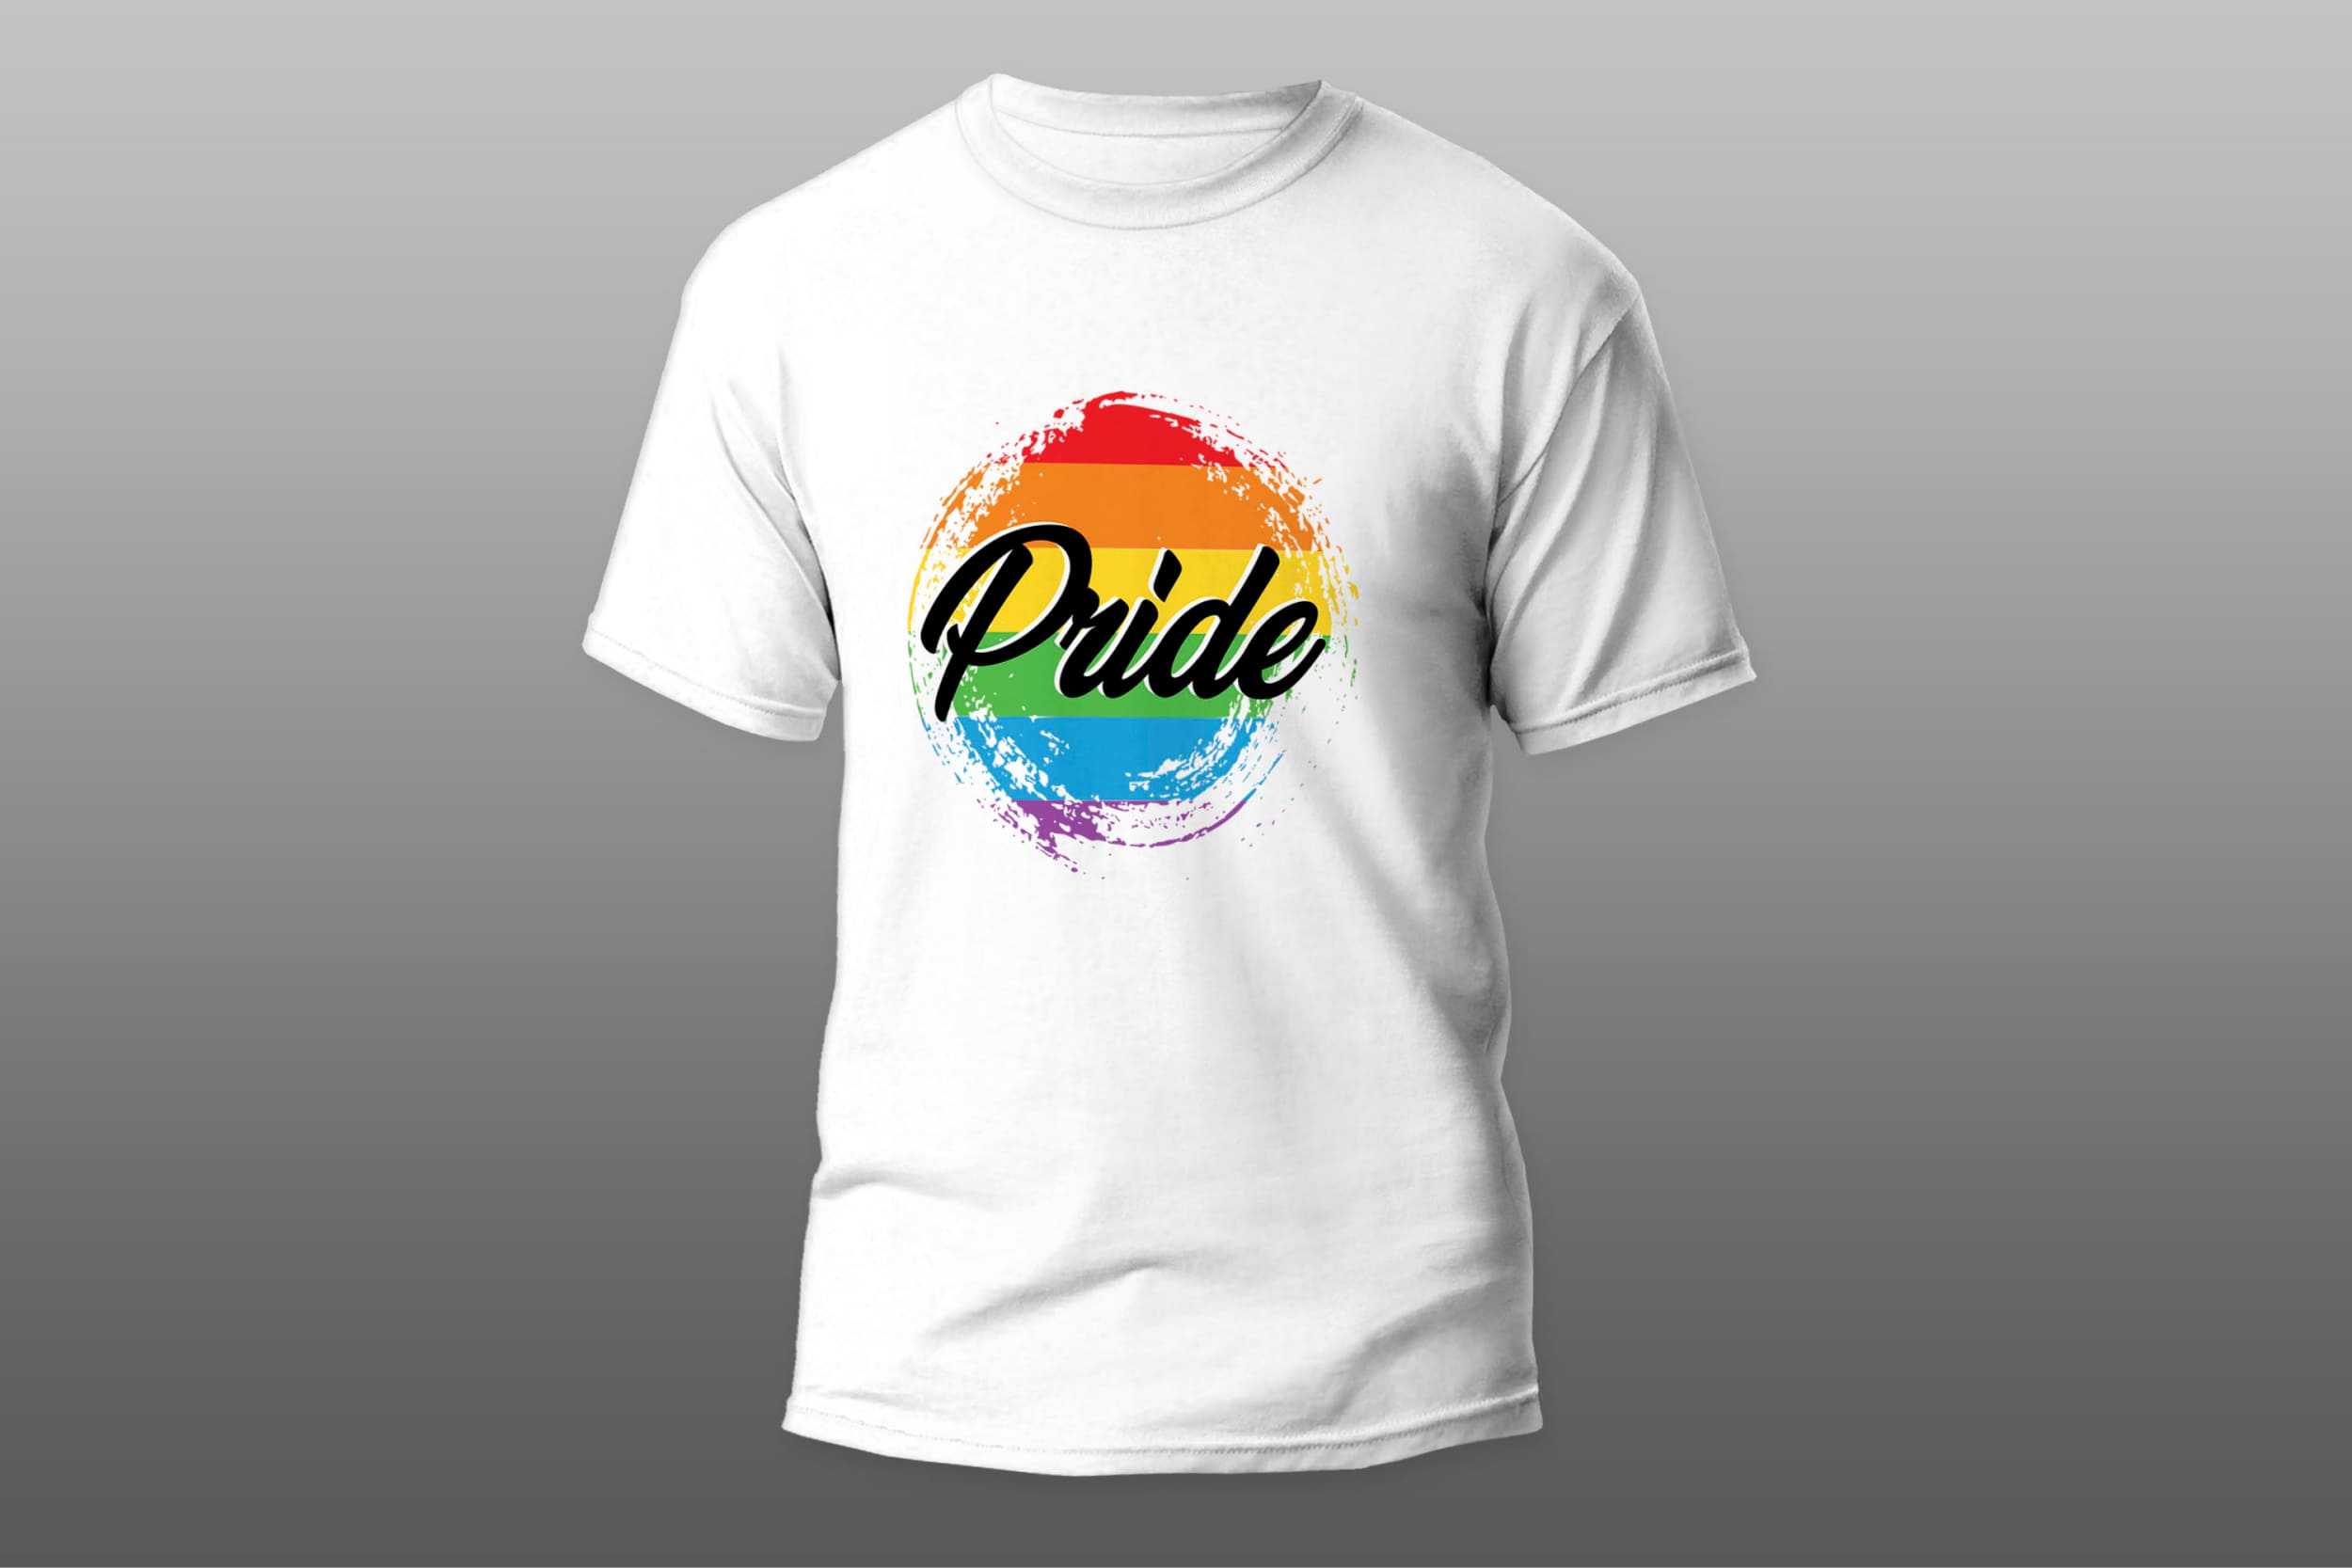 White t-shirt with black "Pride" lettering against the background of the LGBT flag on a gray background.